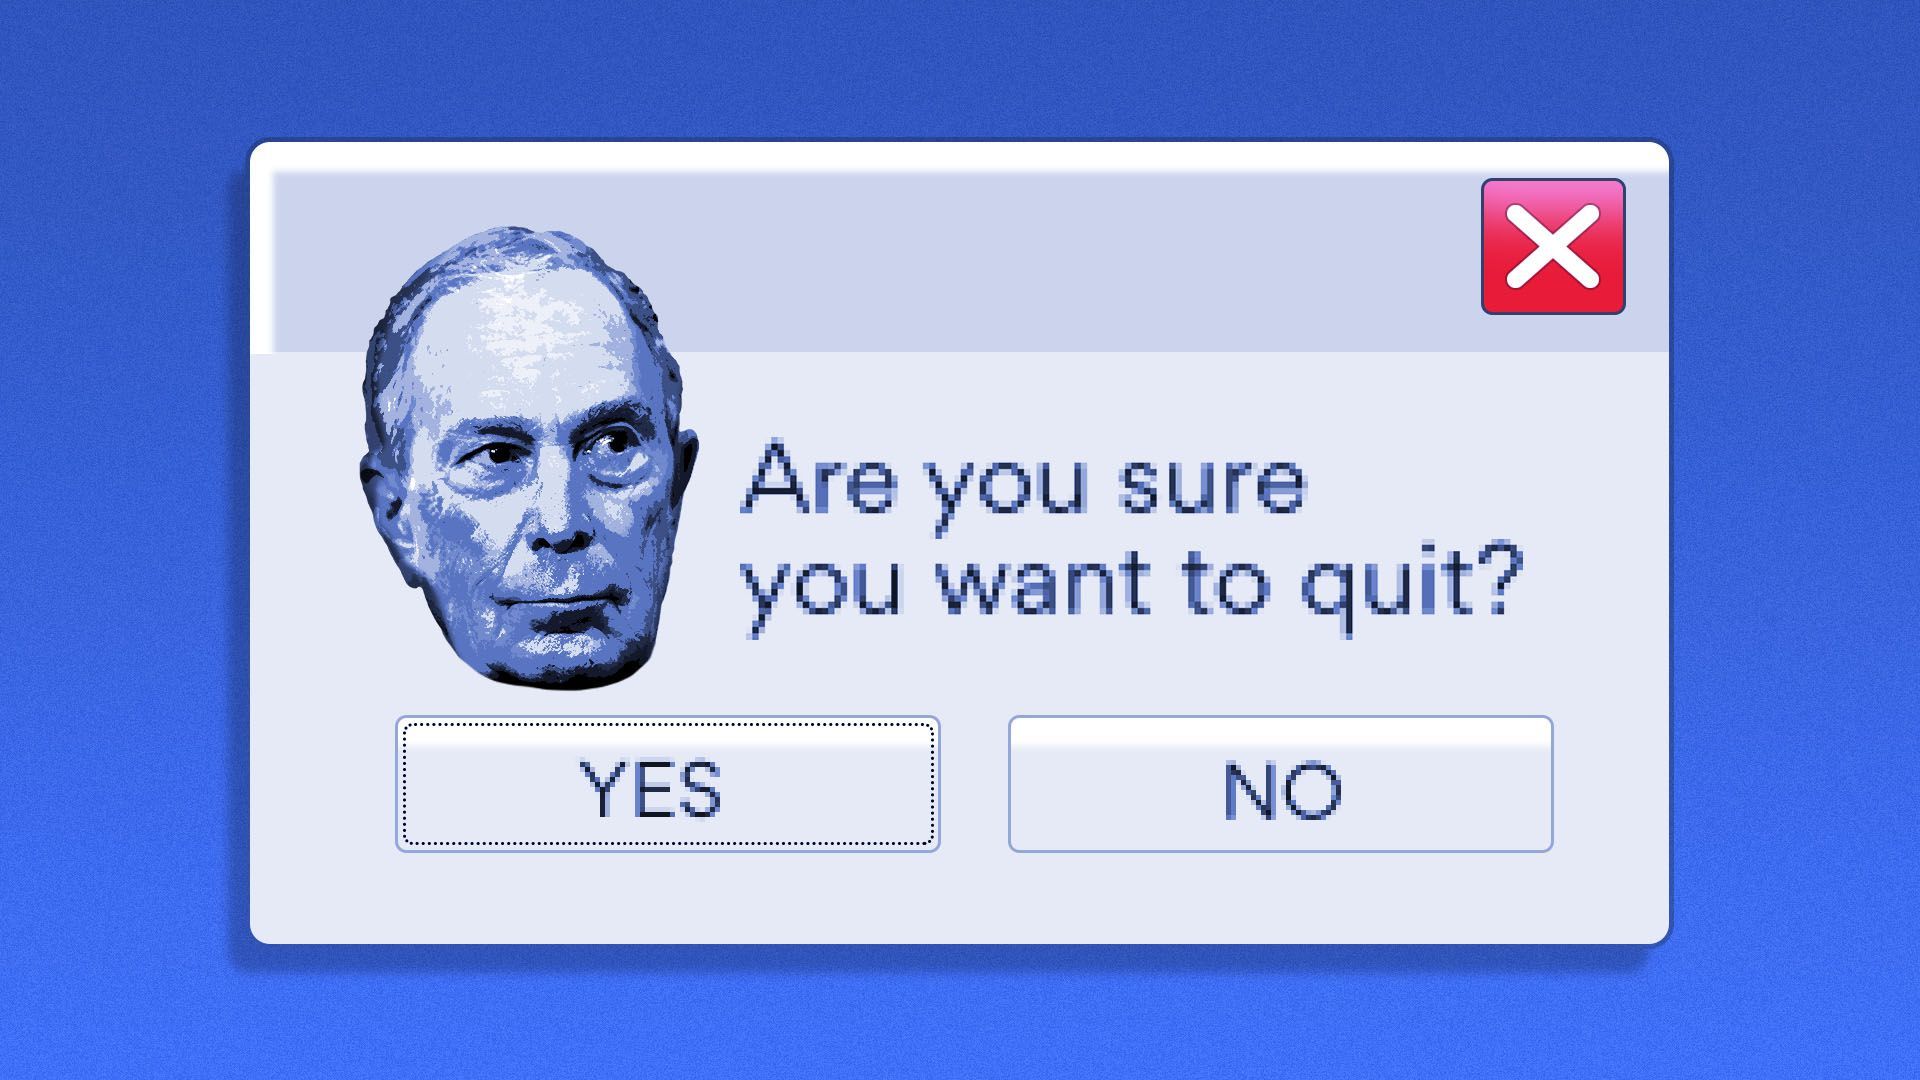 Illustration of a computer dialogue box that reads "are you sure you want to quit?" with an icon of Michael Bloomberg